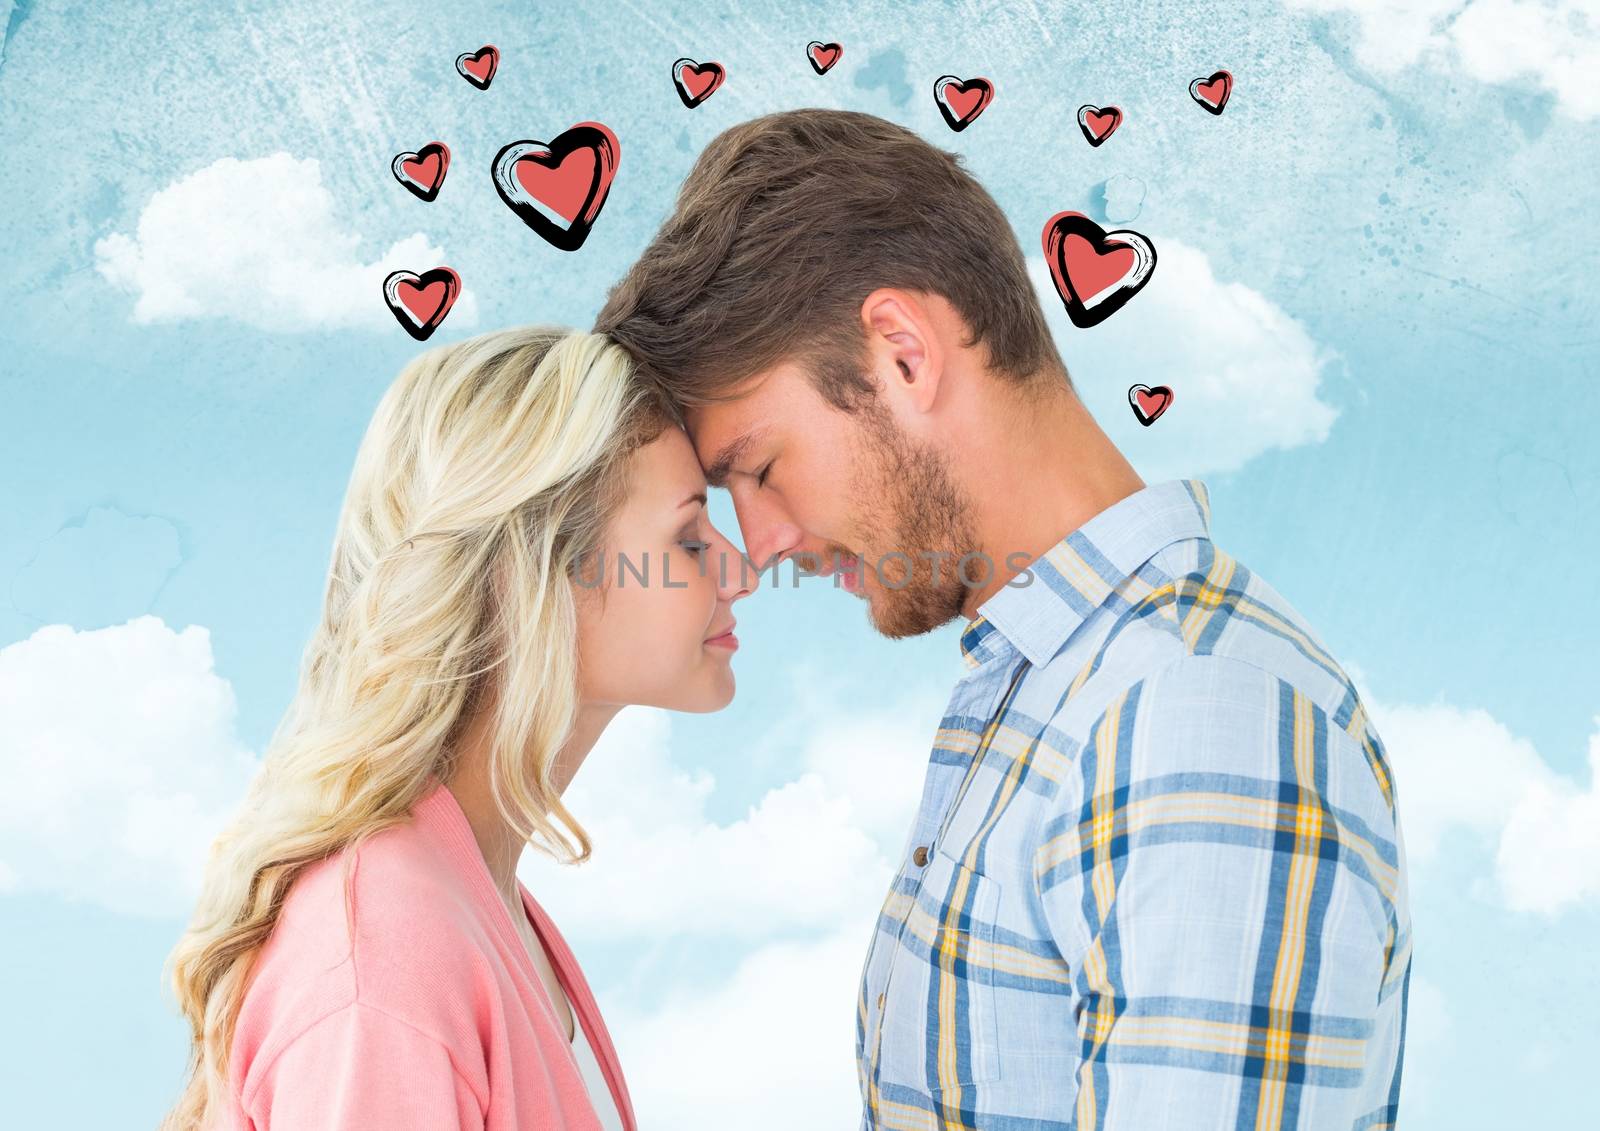 Composite image of romantic couple with heart embracing face to face